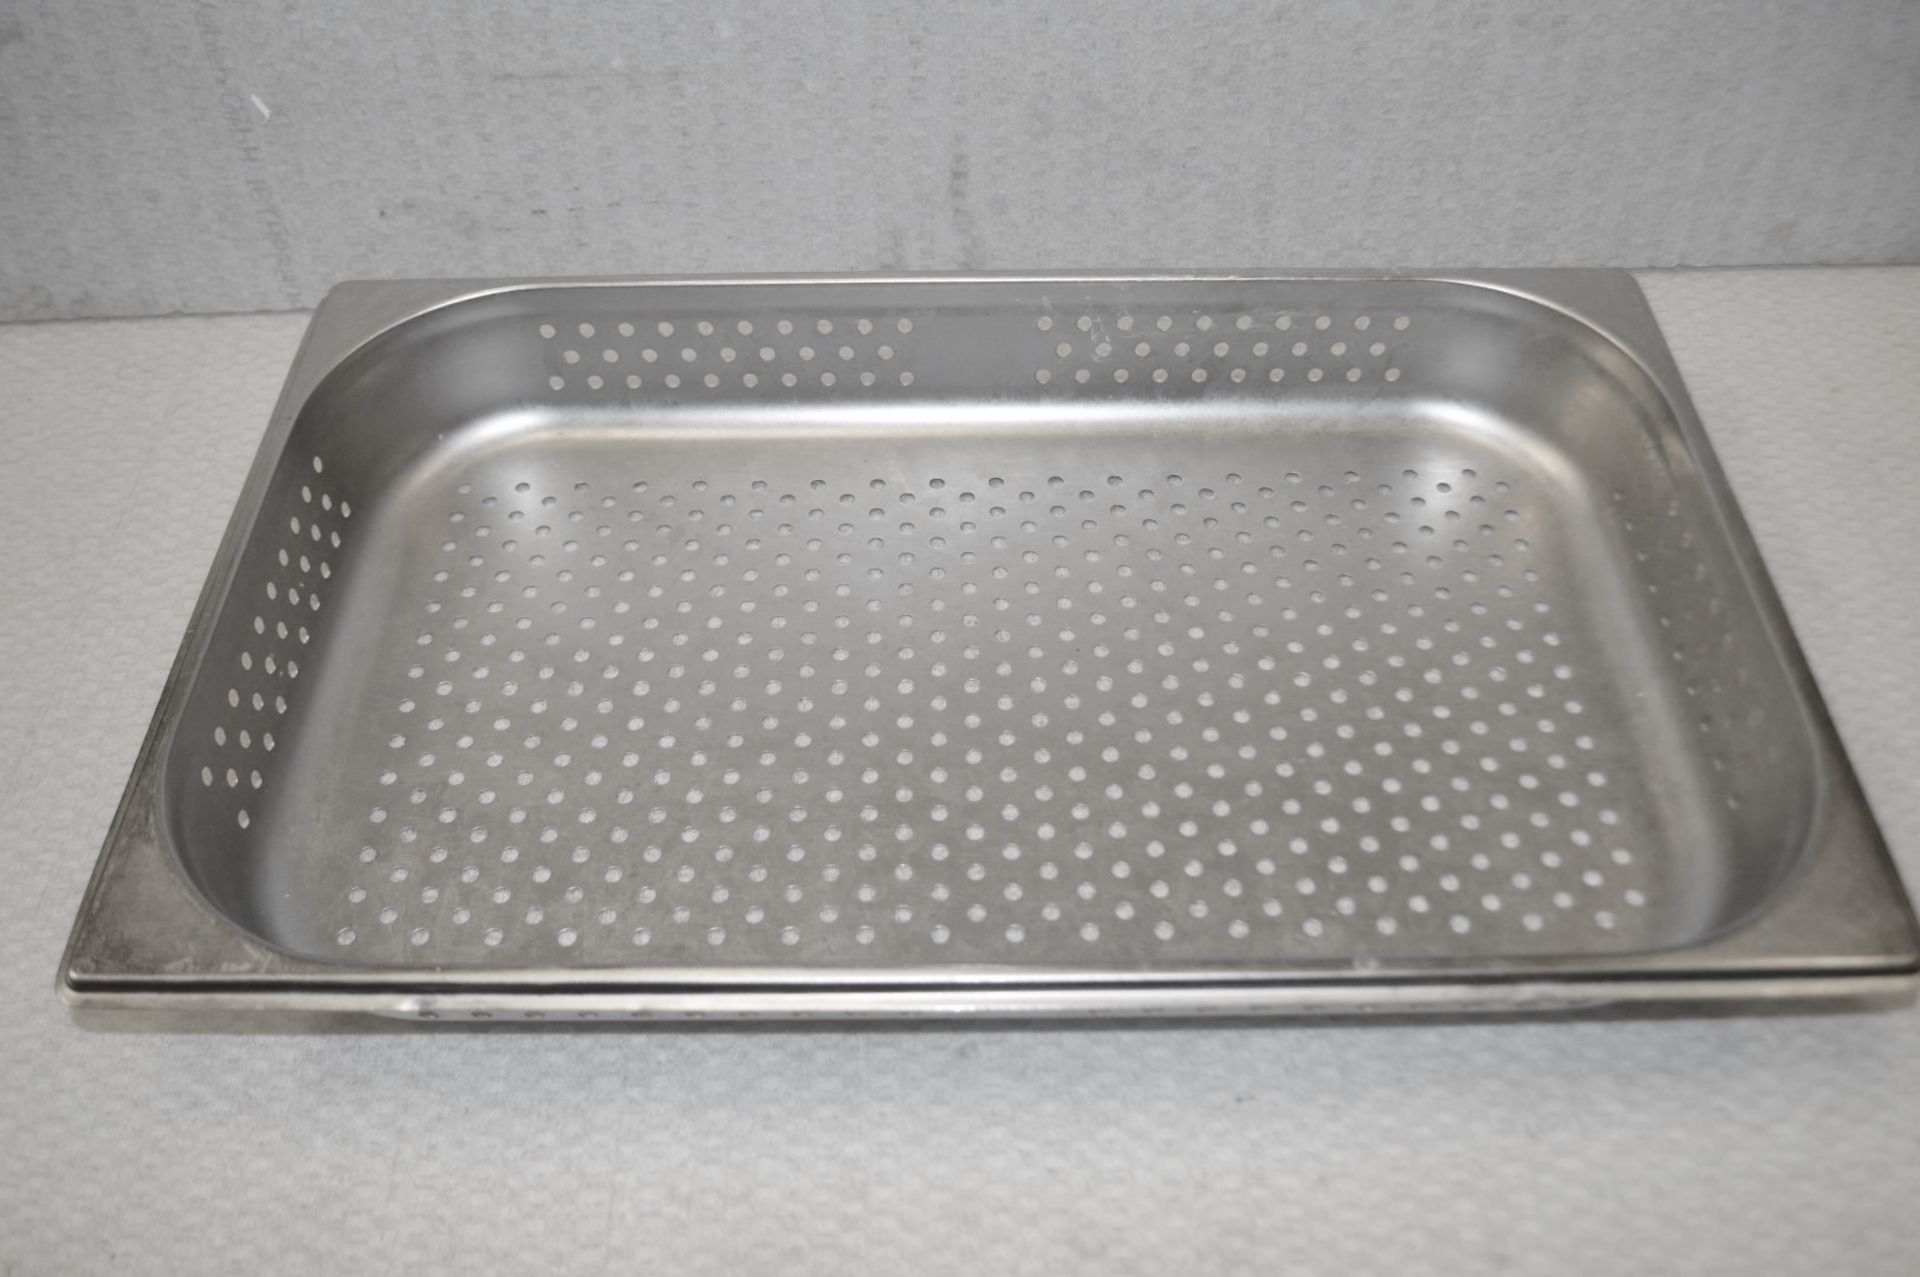 12 x Stainless Steel Perforated Gastronorm Trays - Dimensions: L53 x W33 x D6cm - Recently Removed - Image 2 of 2